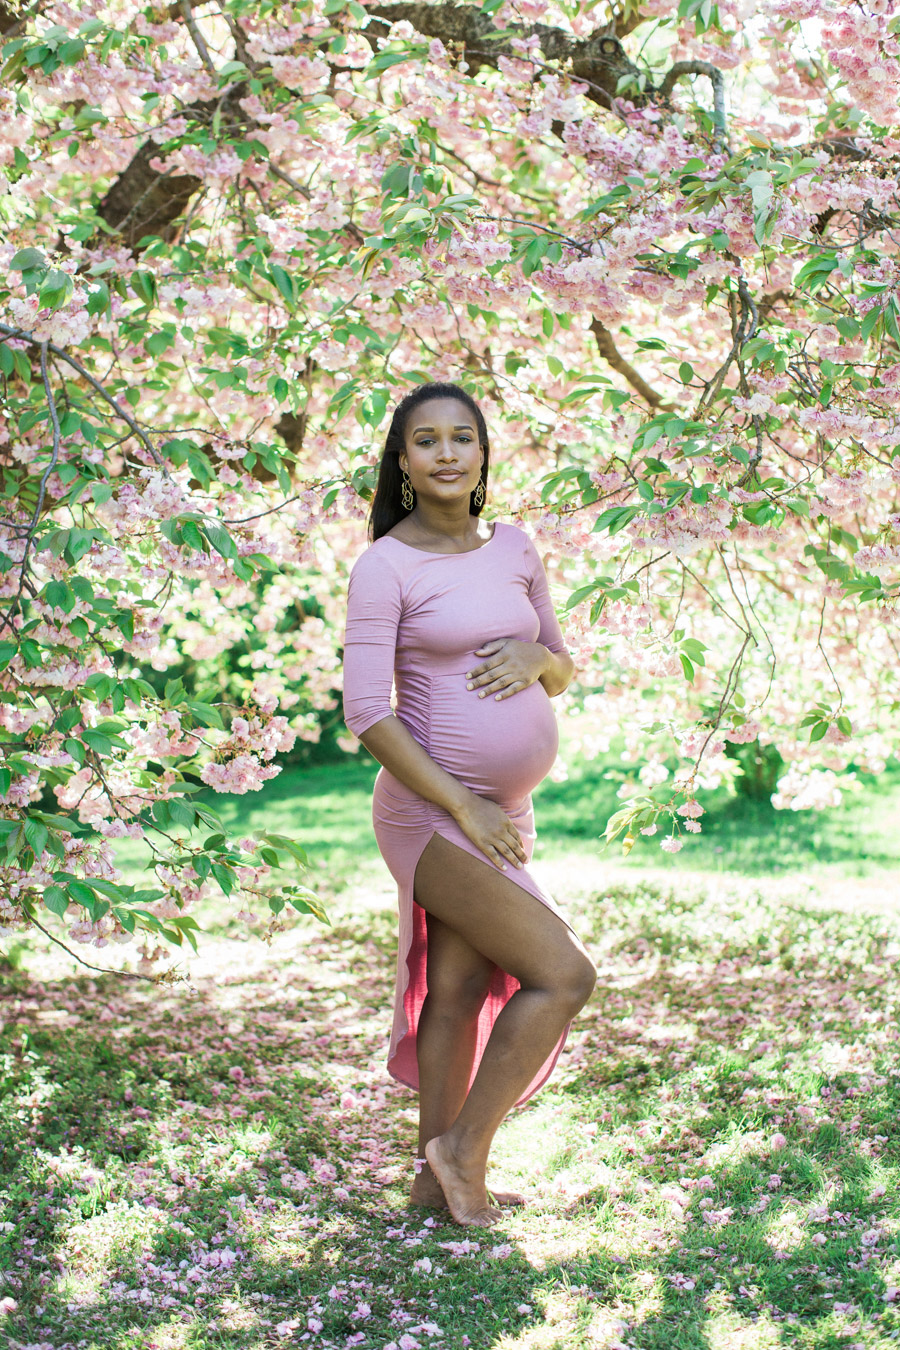 Maternity session in the New York Botanical Gardens cherry blossoms. Photos by Kelly Kollar Photography